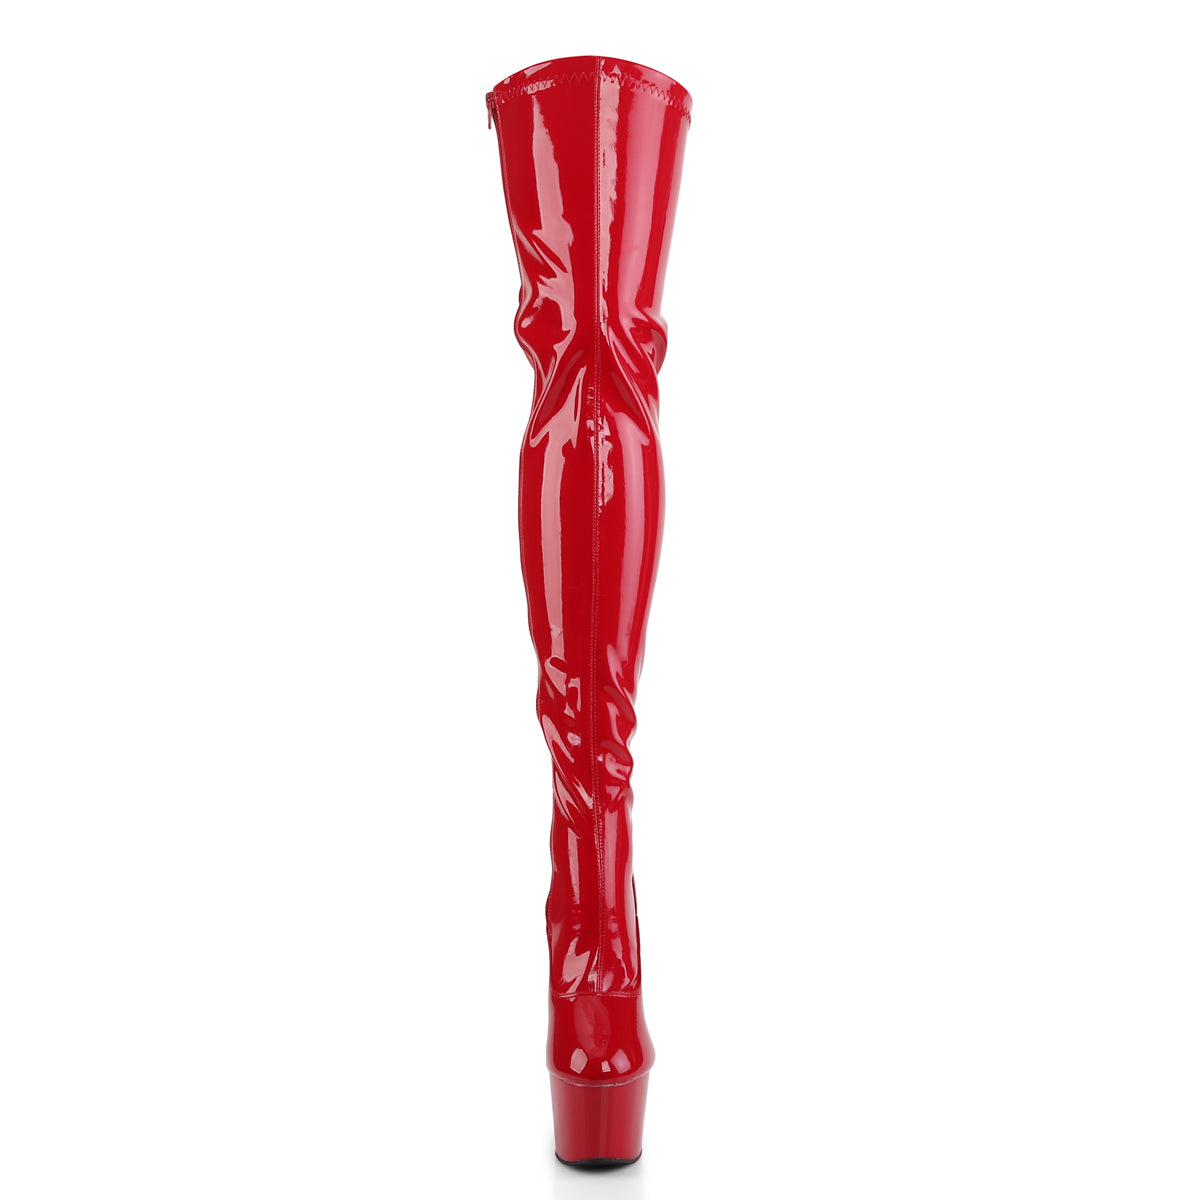 ADORE-3063 Pleaser 7 Inch Heel Red Pole Dancing Kinky Boots-Pleaser- Sexy Shoes Alternative Footwear